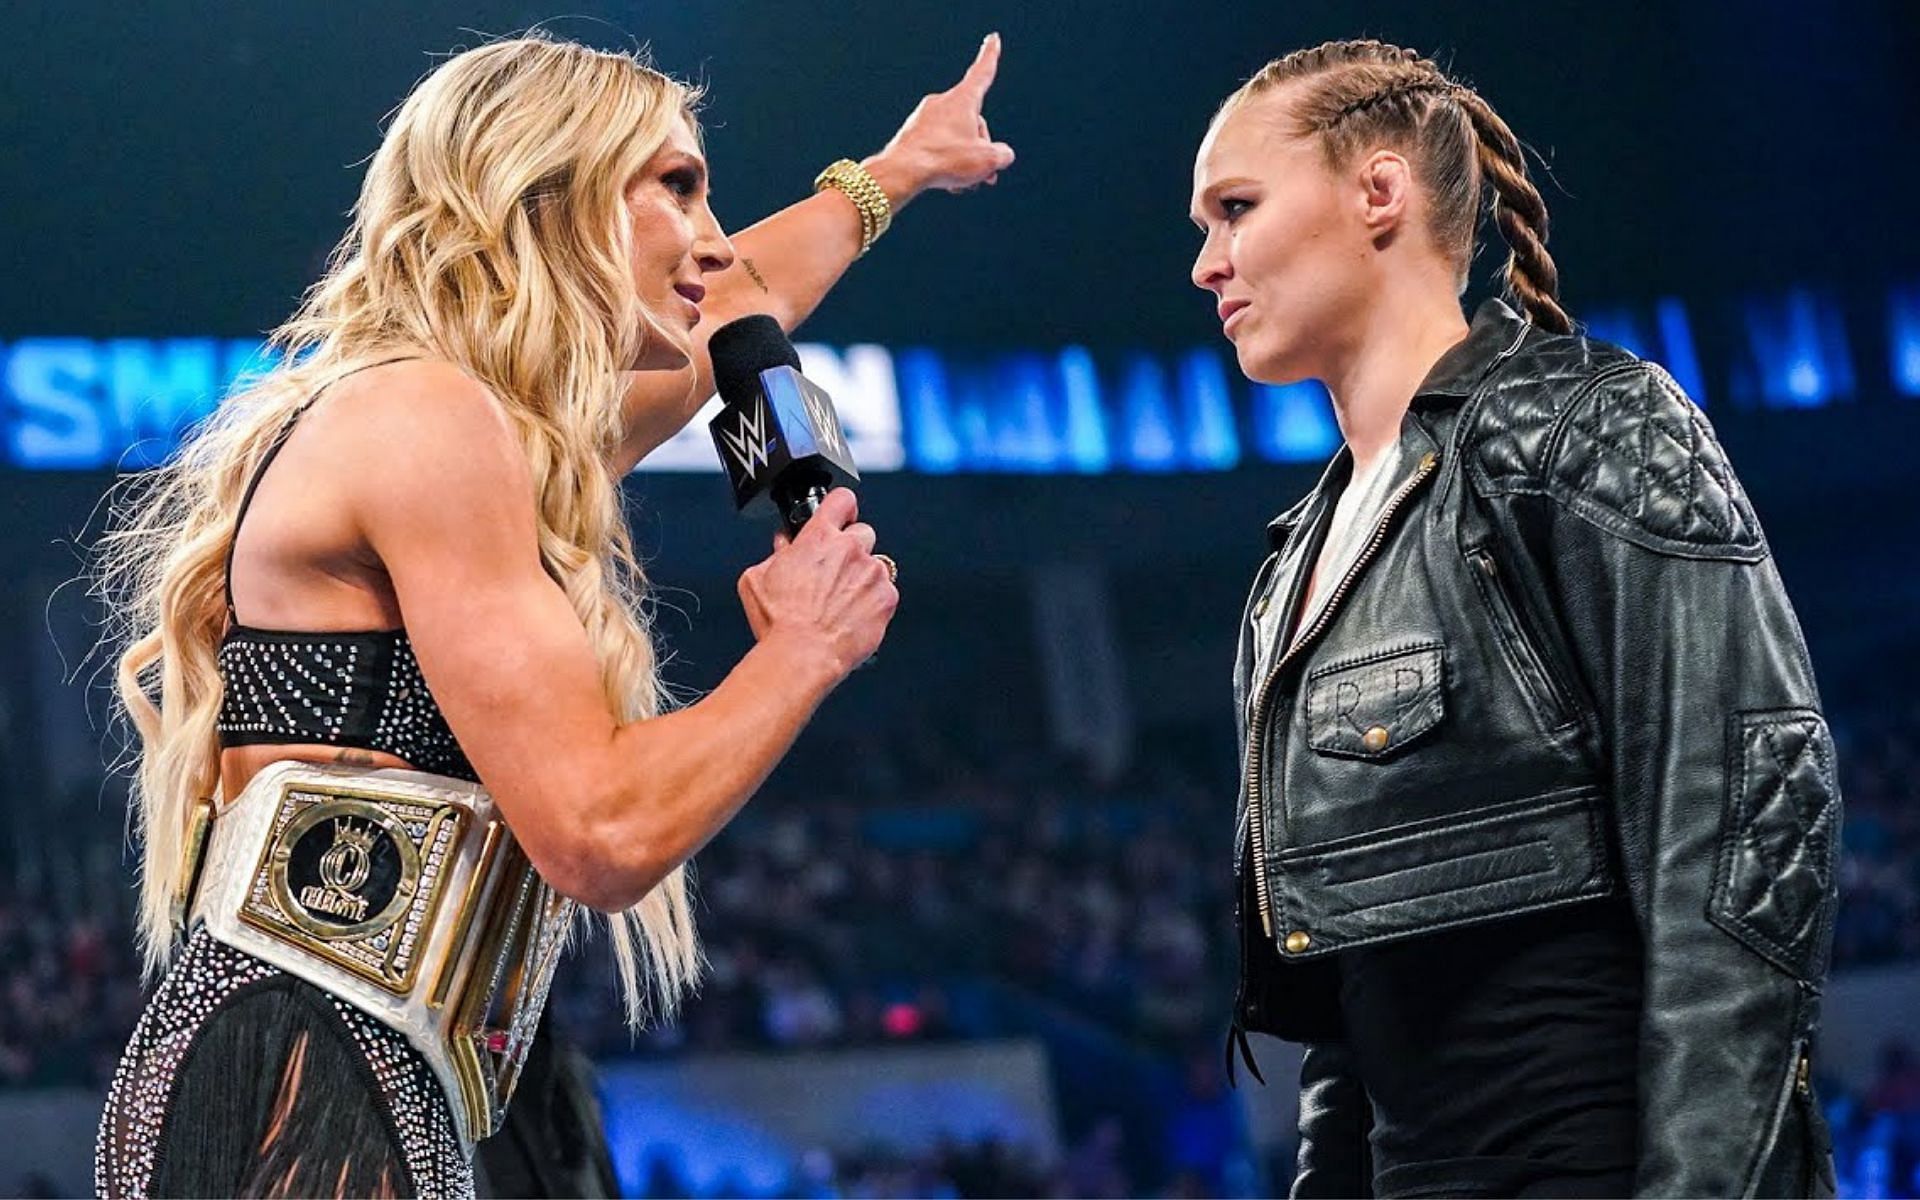 The Baddest Women on the Planet and The Queen are set to face each other in an &#039;I Quit&#039; match